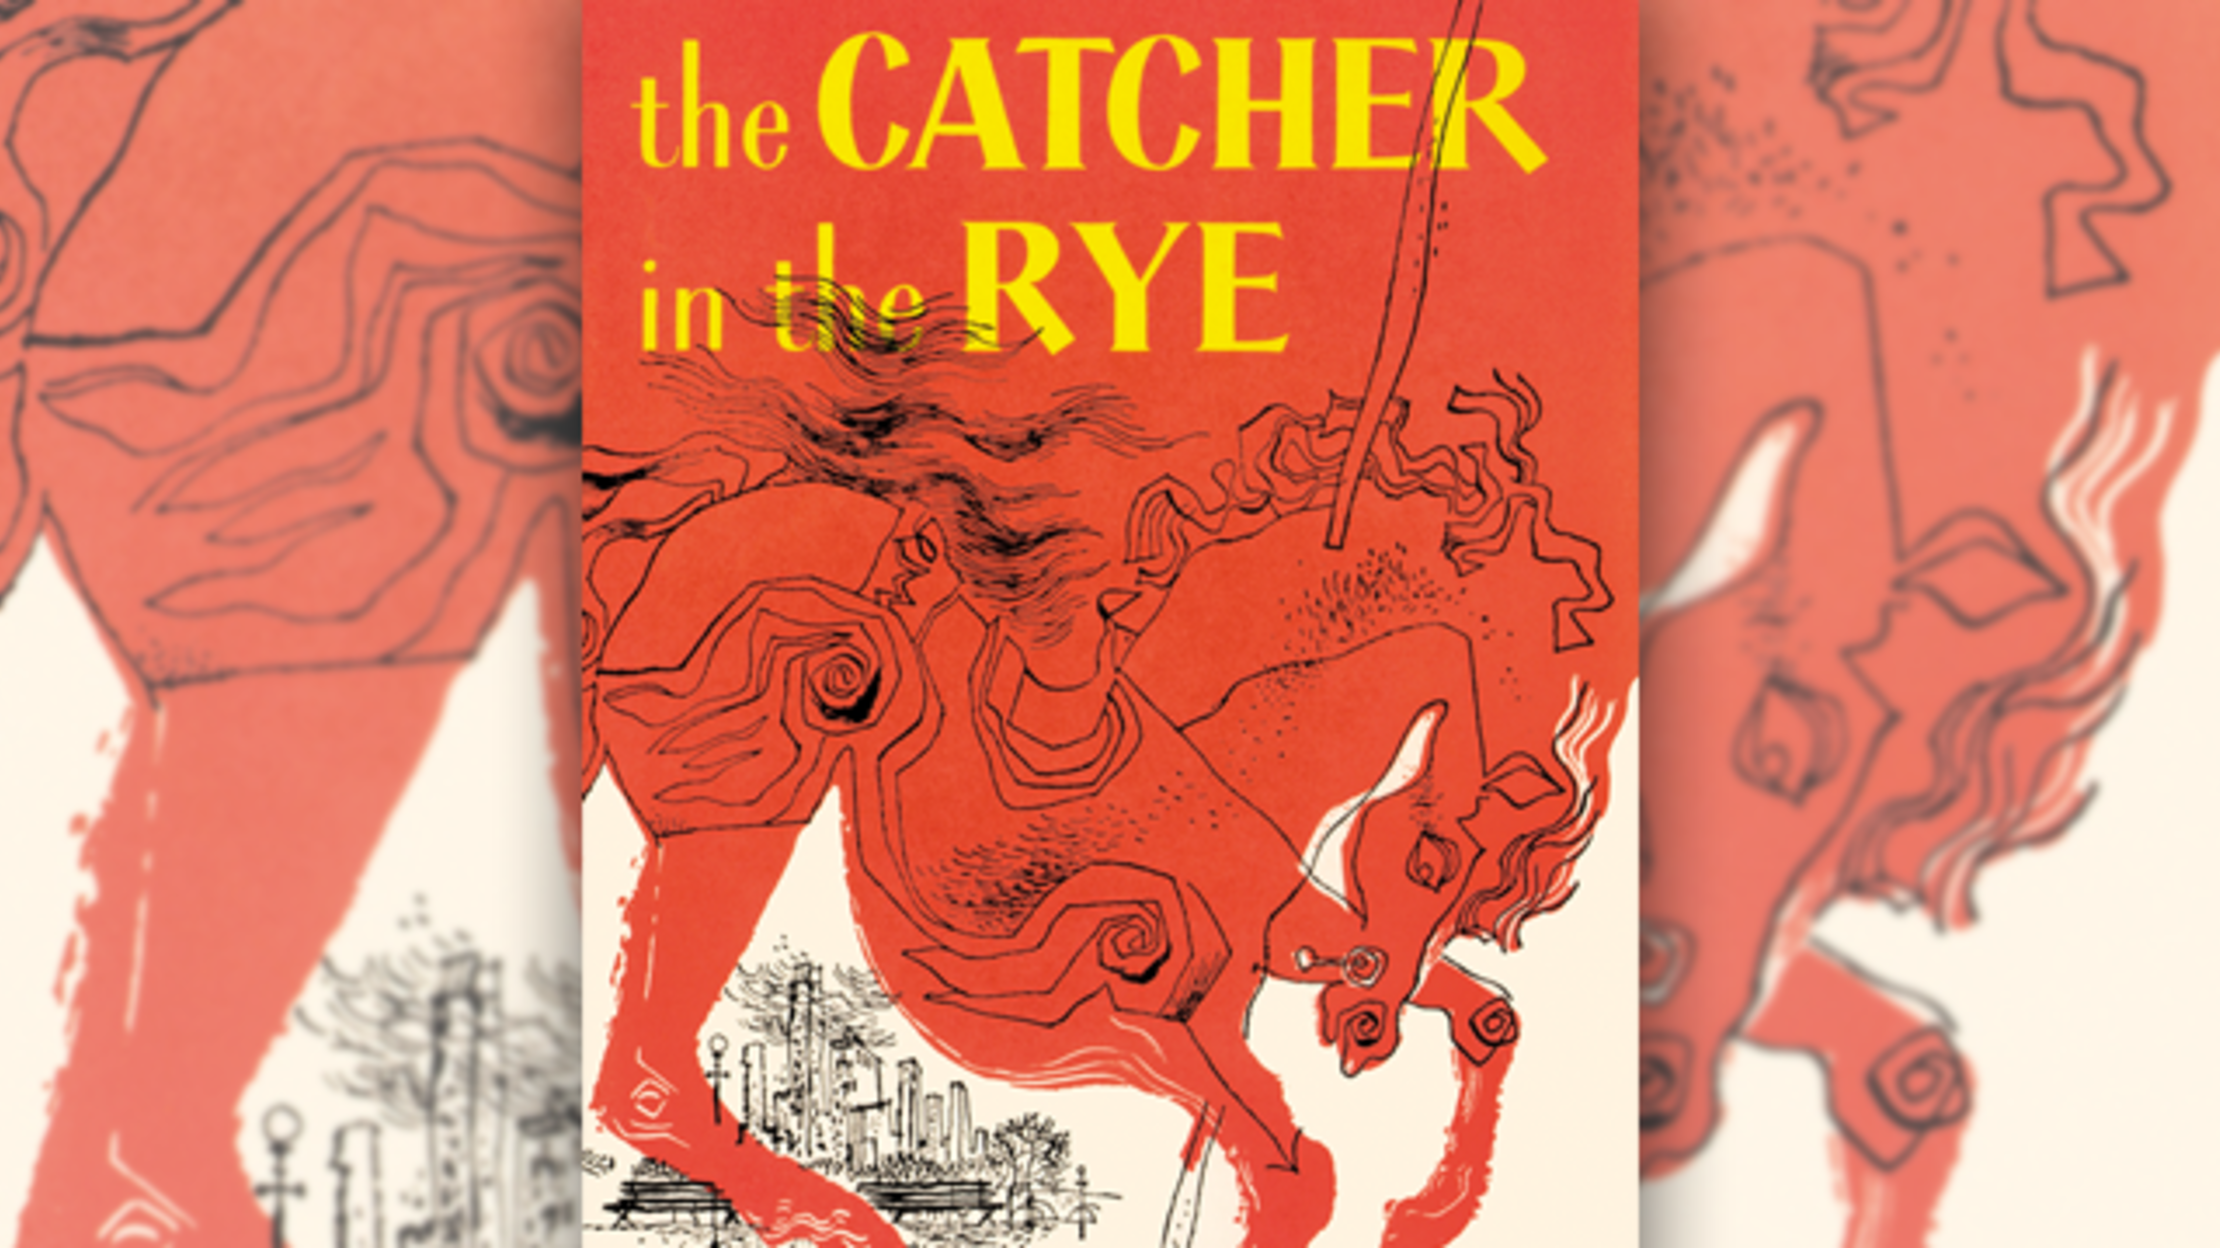 why was the catcher in the rye banned